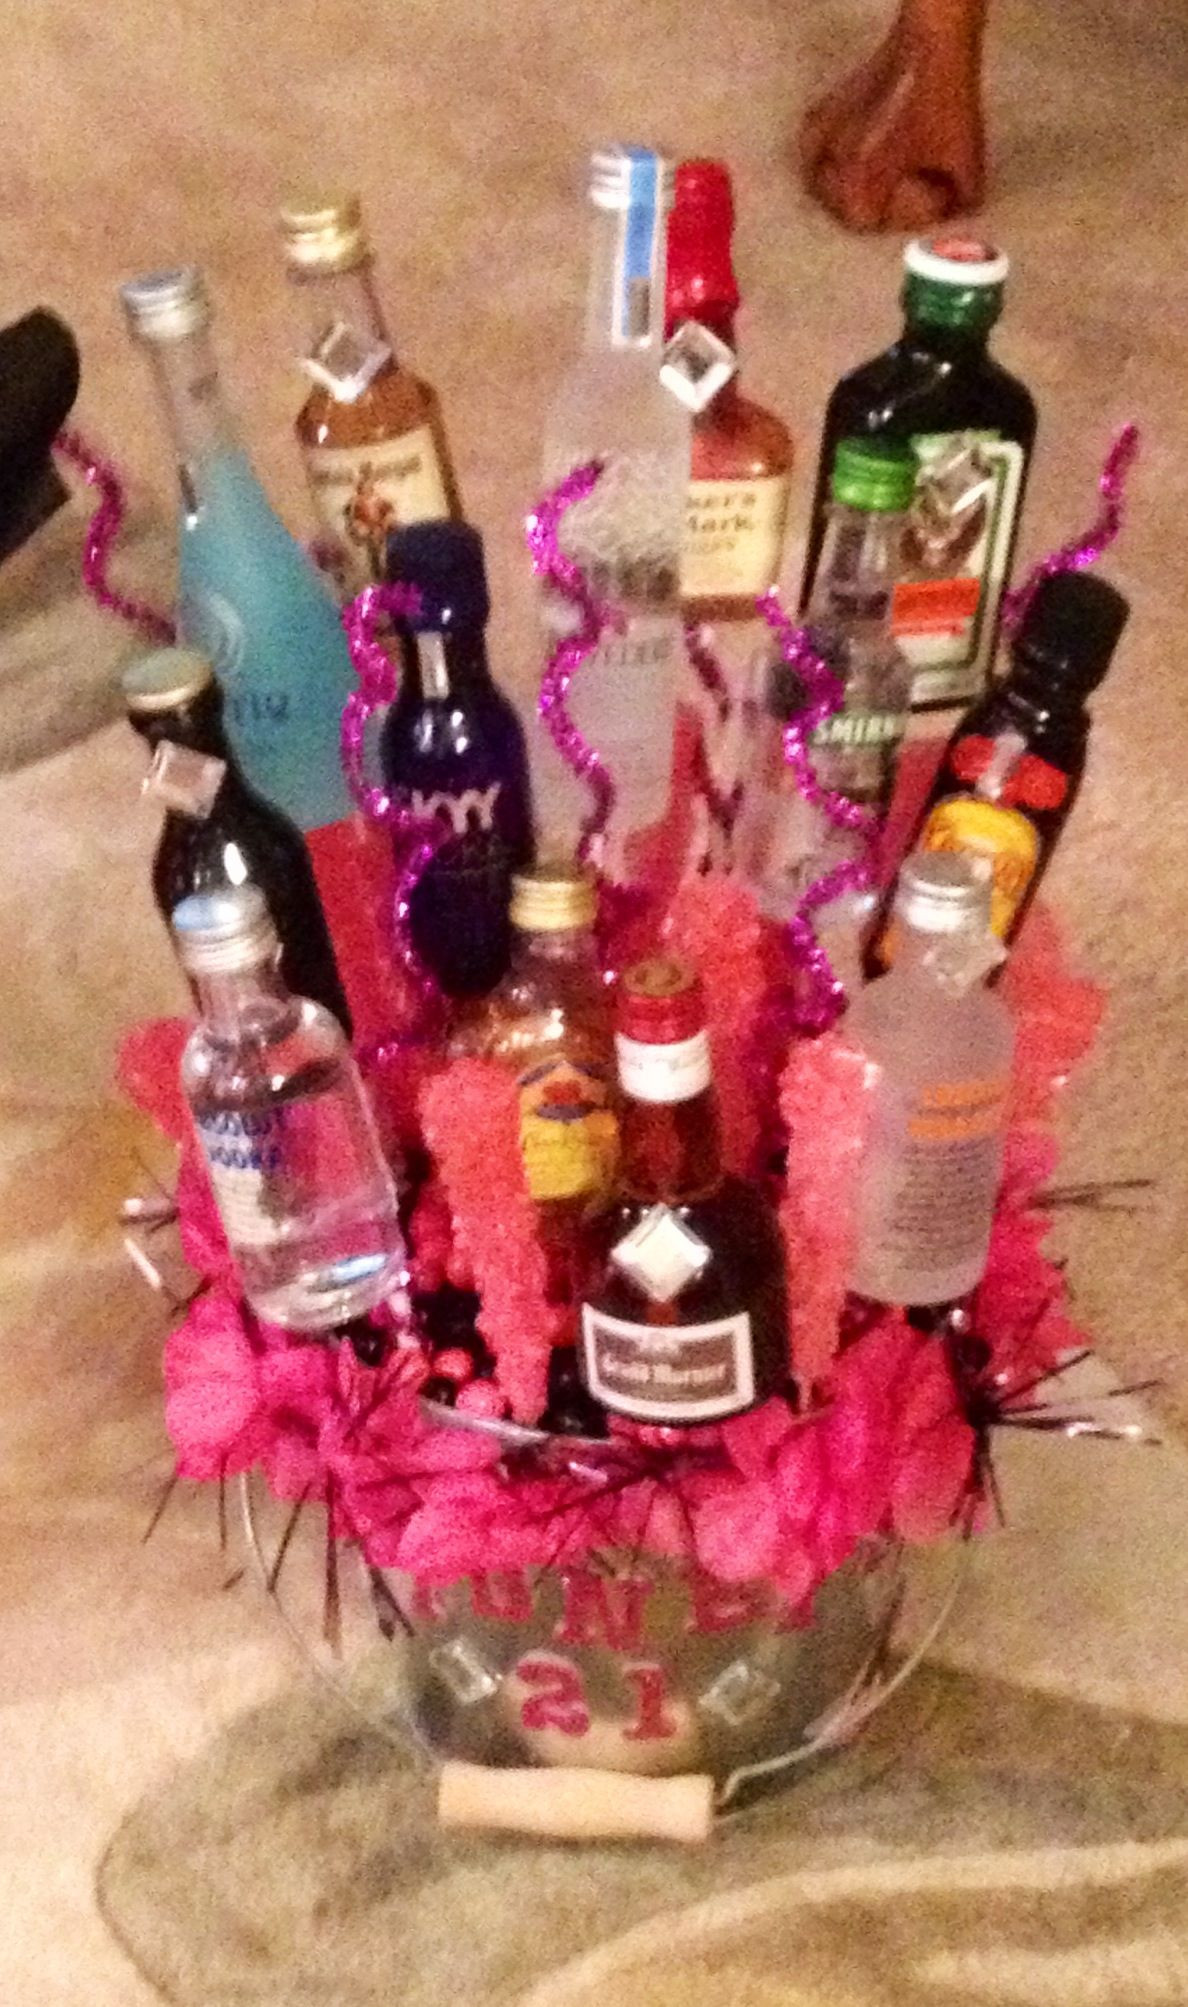 21St Birthday Gift Basket Ideas
 Made an edible alcohol basket for my dear friend for her